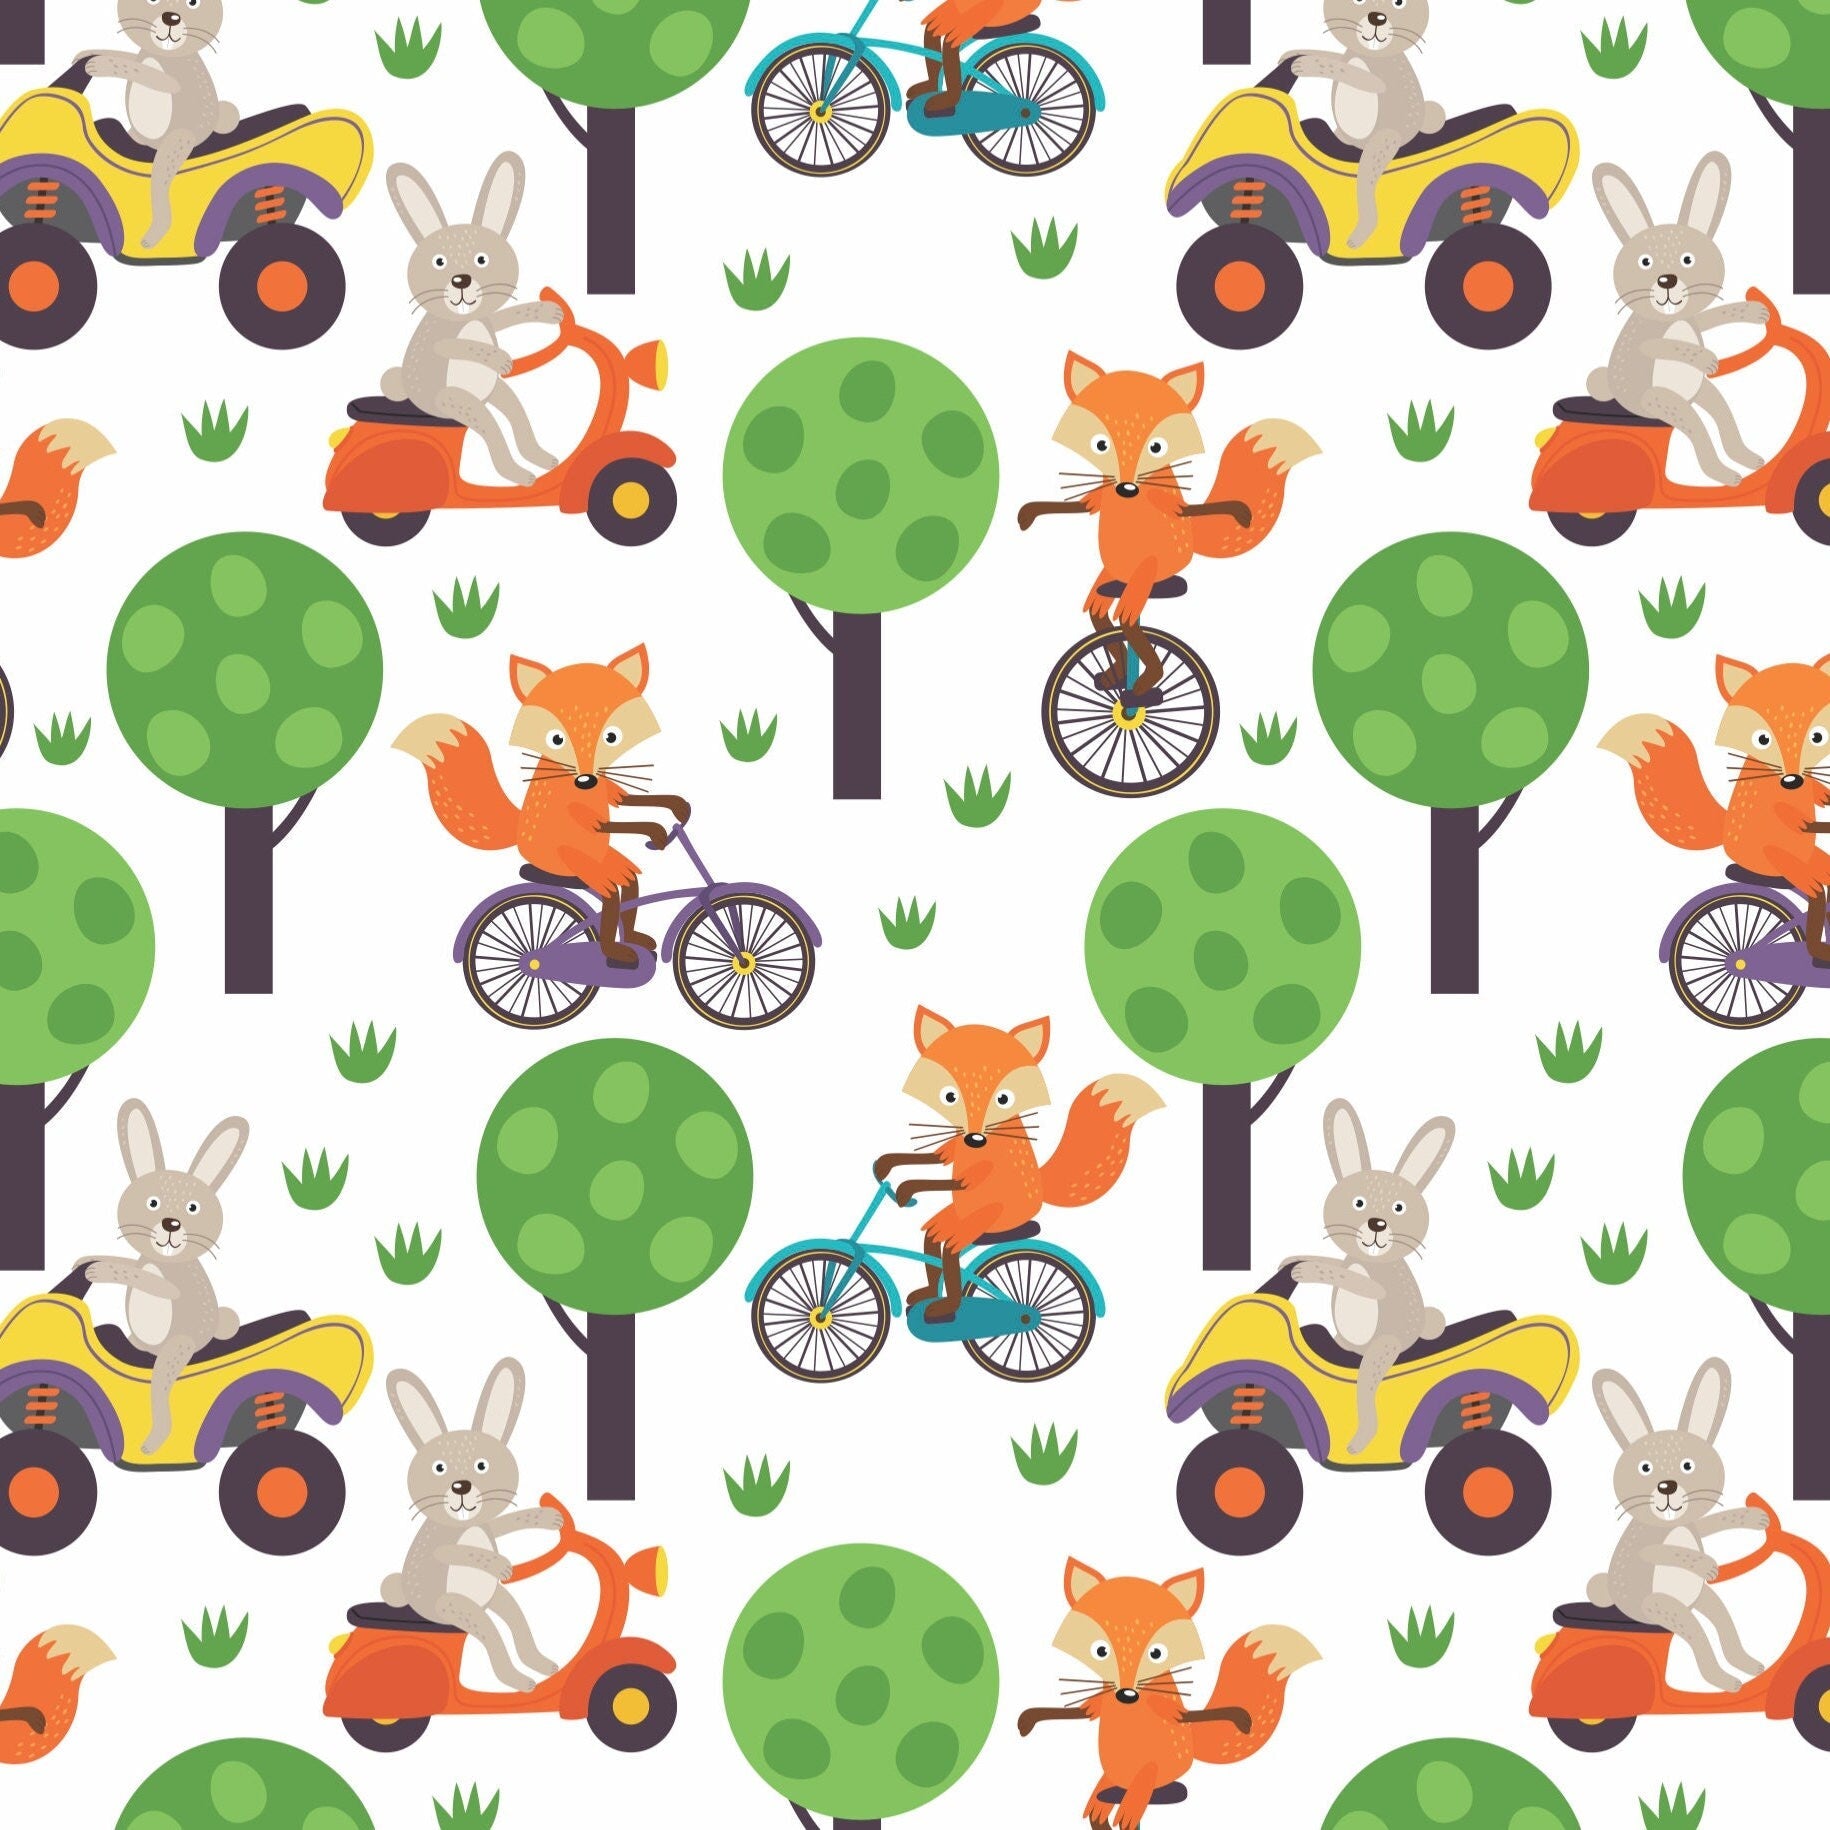 Sikiweiter Woodland Theme Wrapping Paper - Woodland Baby Shower Wrapping  Paper, 12 Sheets Woodland Animals Gift Wrap for Baby Shower Birthday